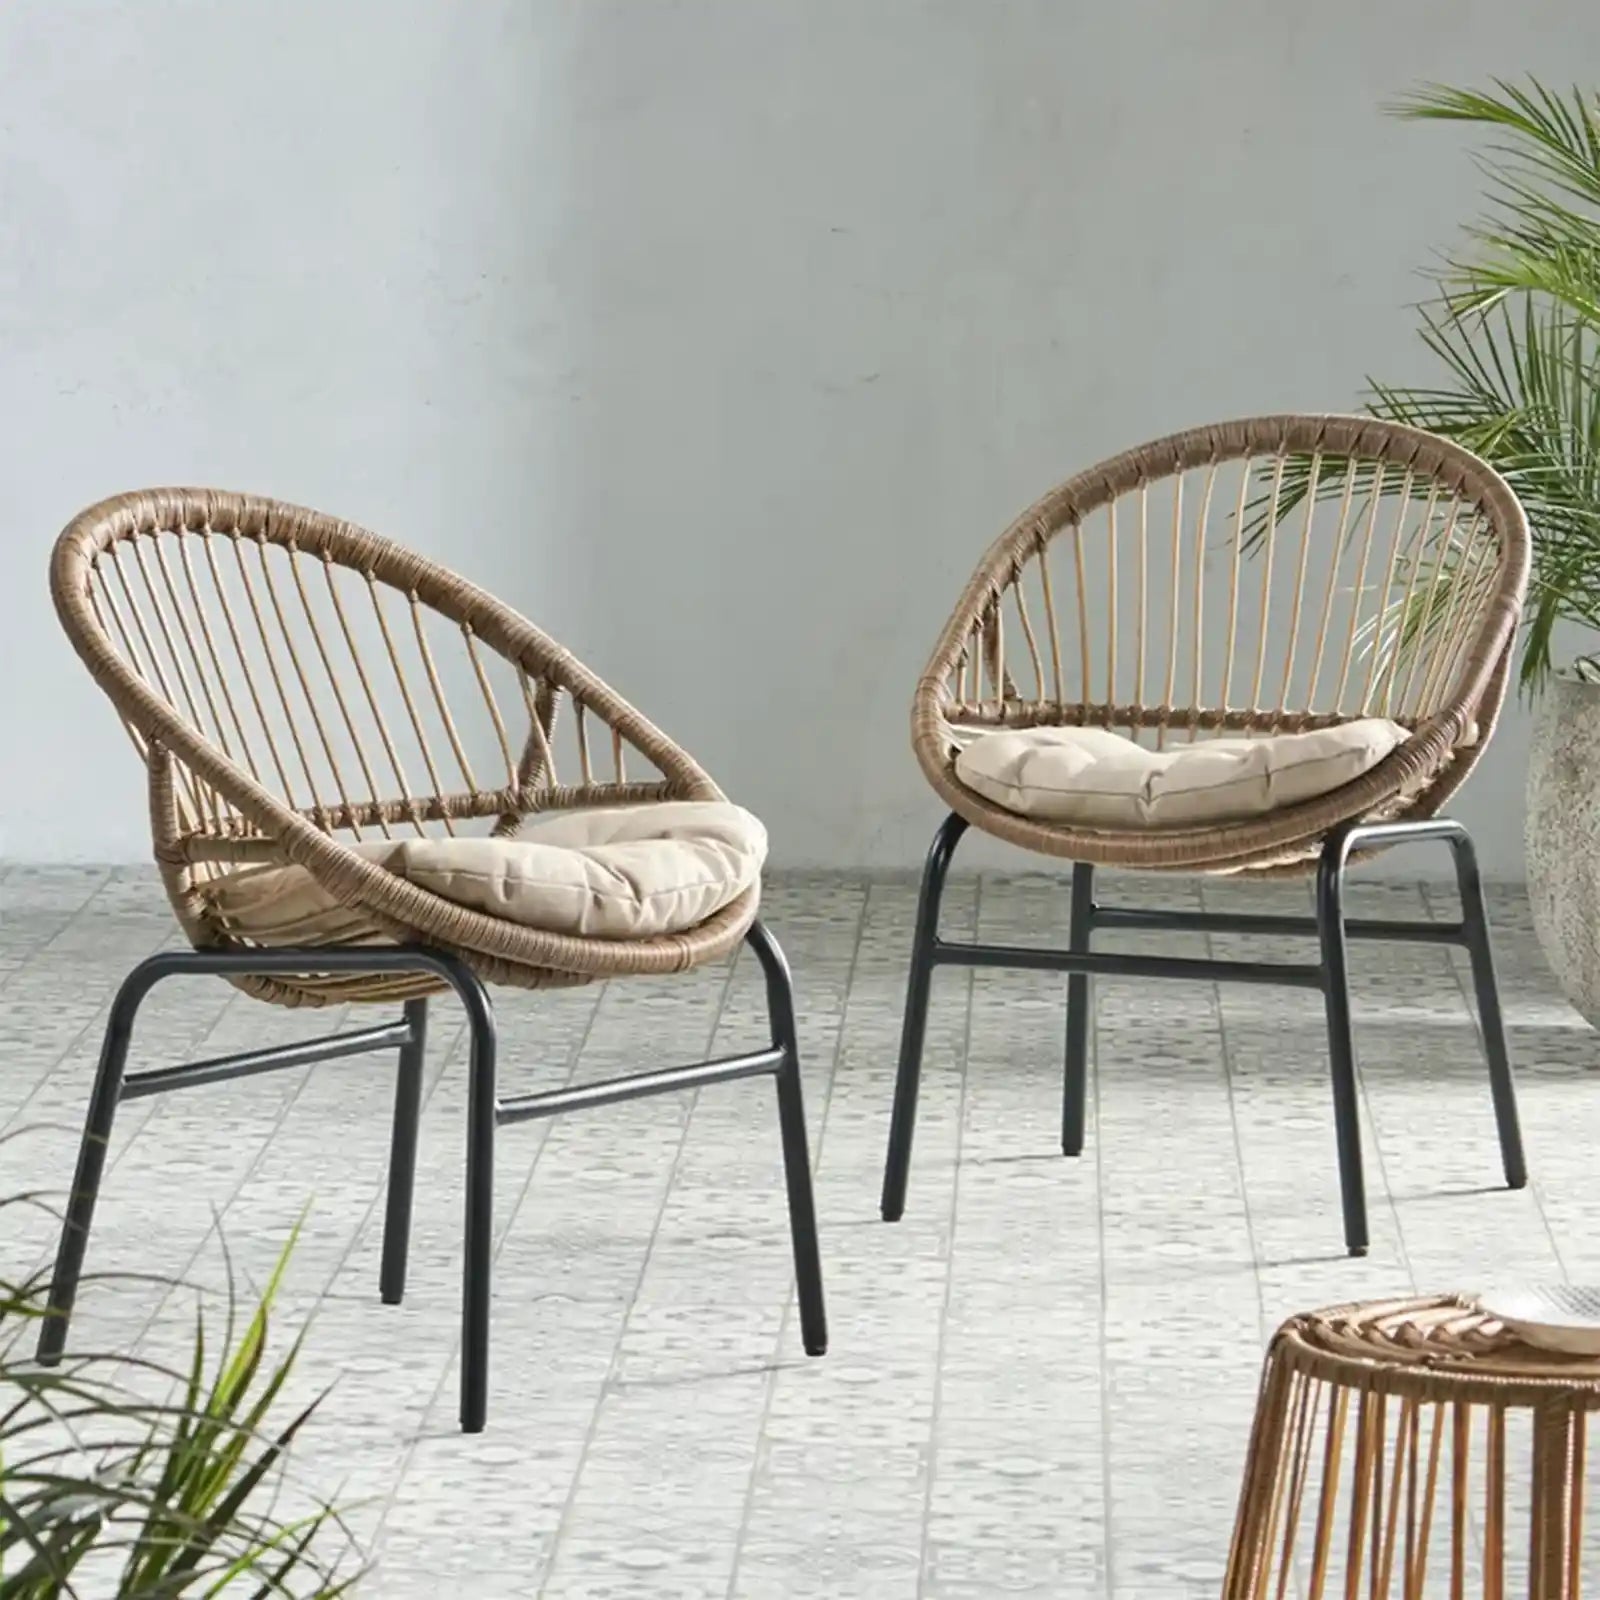 Outdoor Dining Chair - Wicker - Set of 2 - Light Brown, Beige and Matte Black